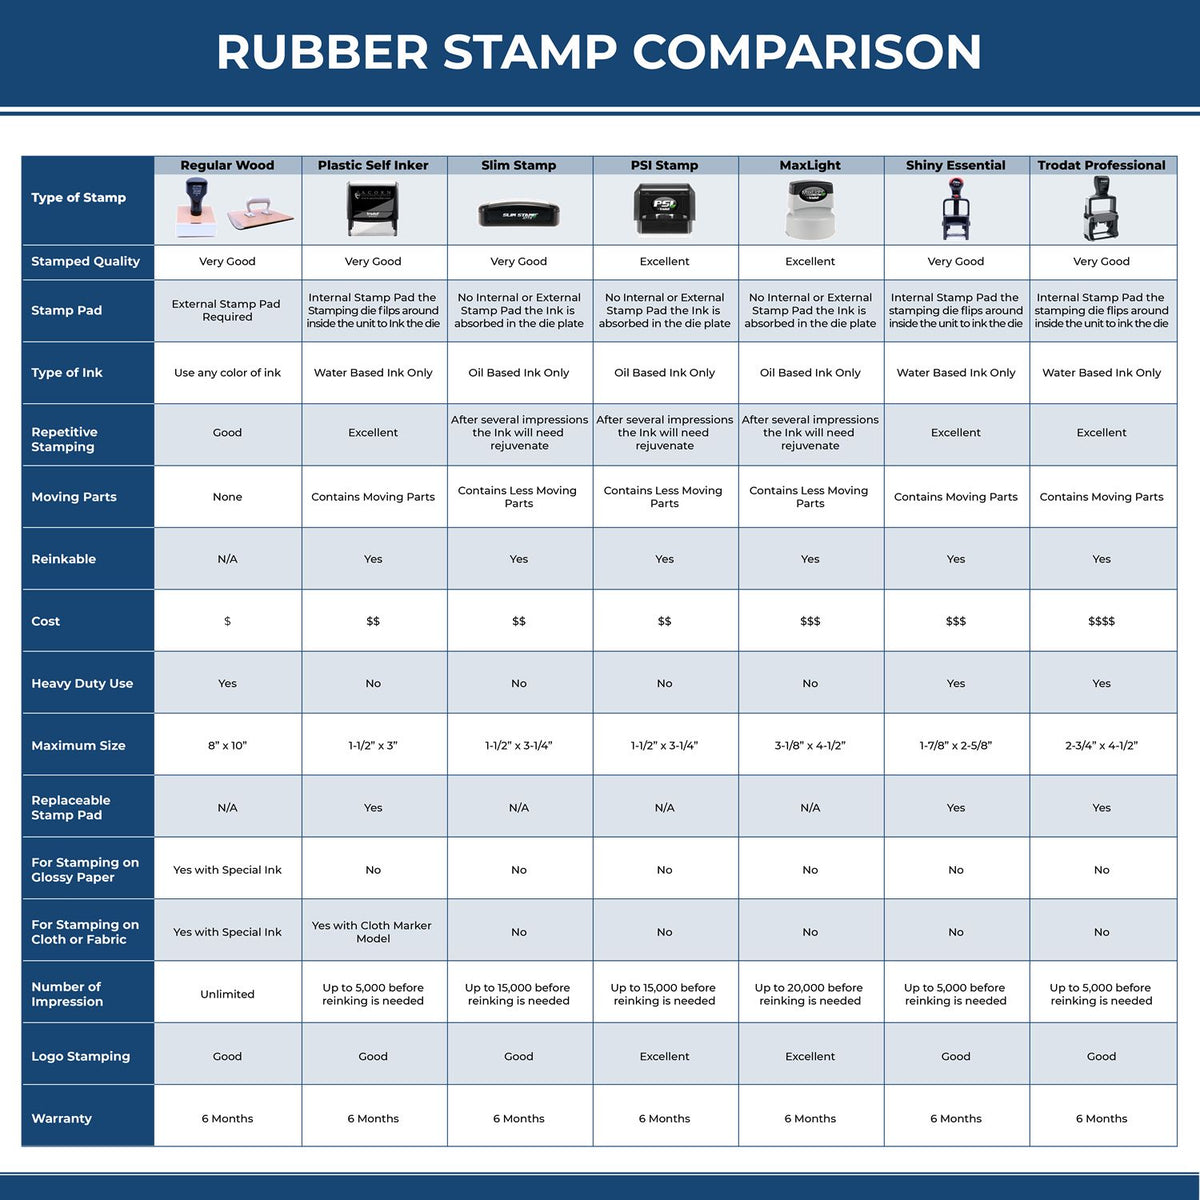 Cash Only Rubber Stamp 4241R Rubber Stamp Comparison